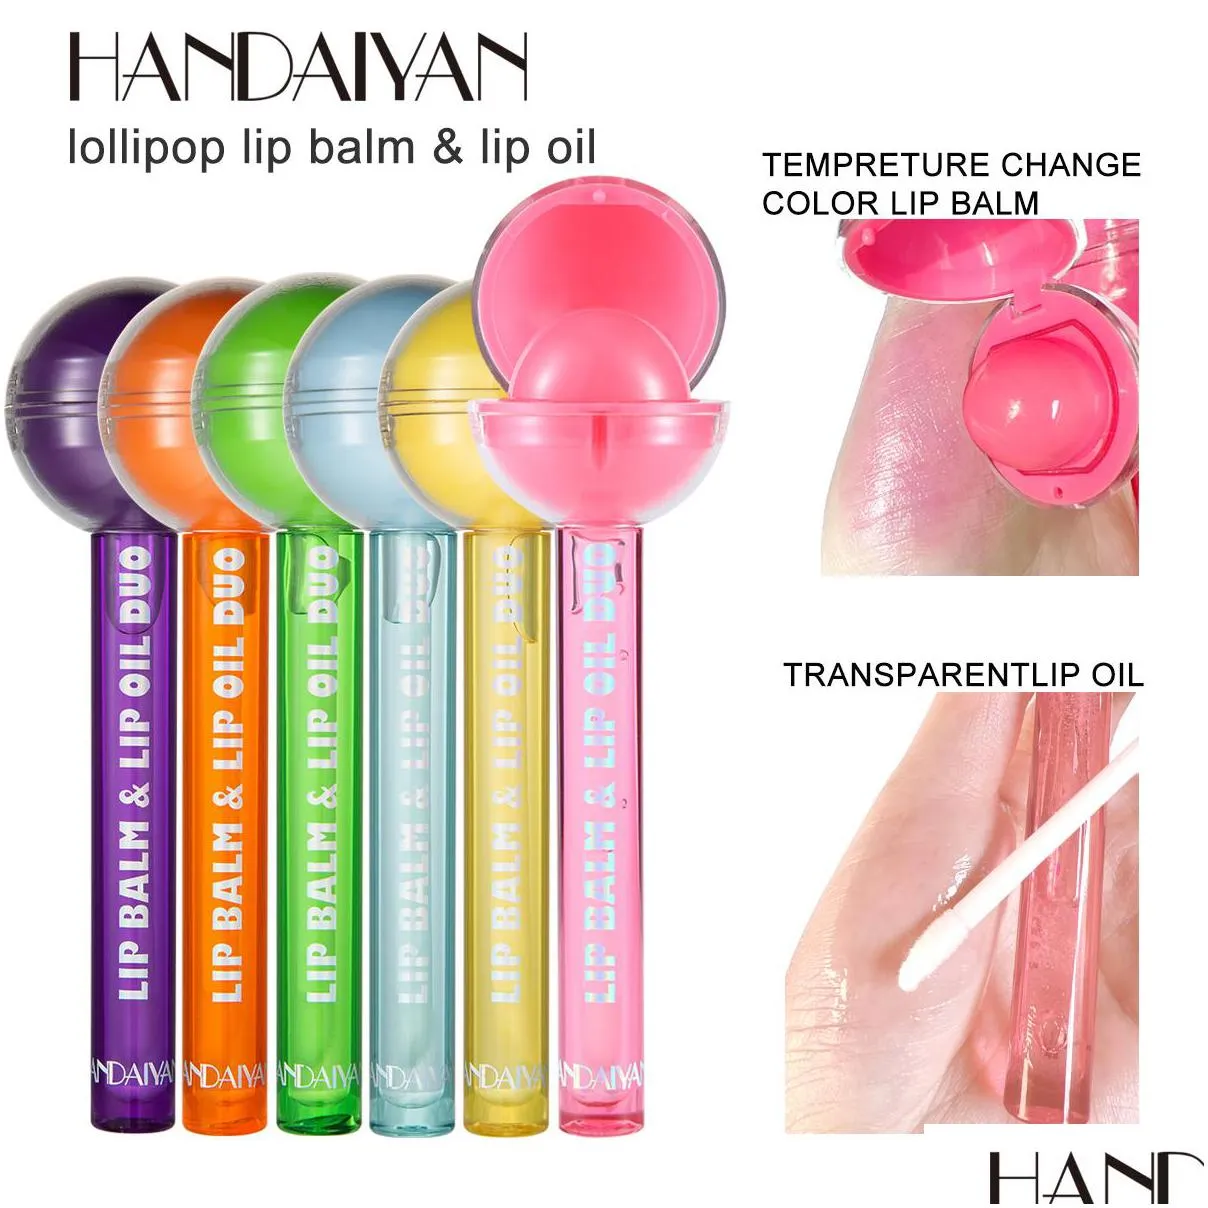 handaiyan lollipop fun round lip balm container lips oil care duo clear gloss moisturizer color change temperature makeup lipgloss kit